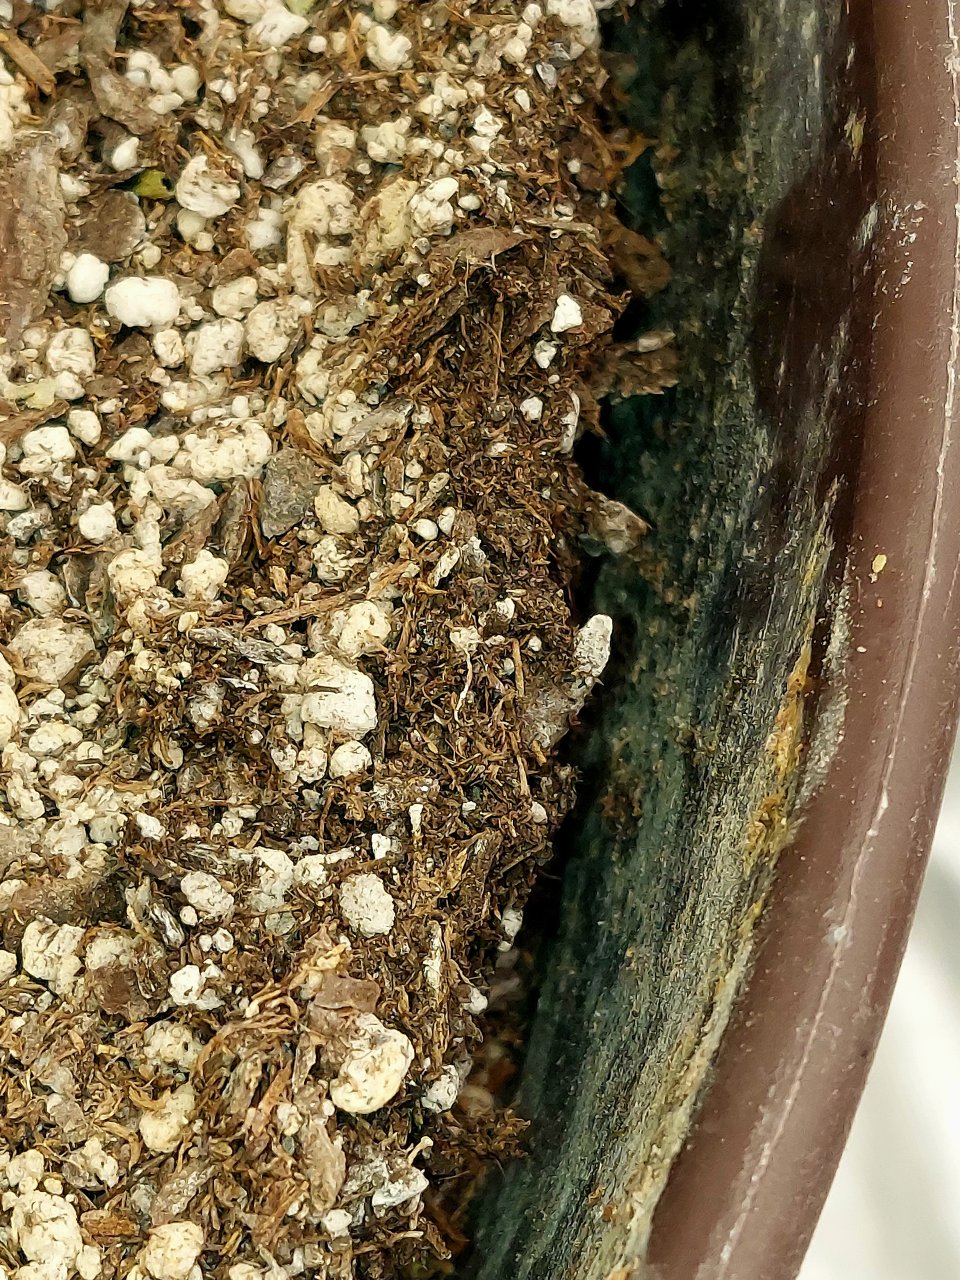 Day 8 droughted 5gl water reserve pot